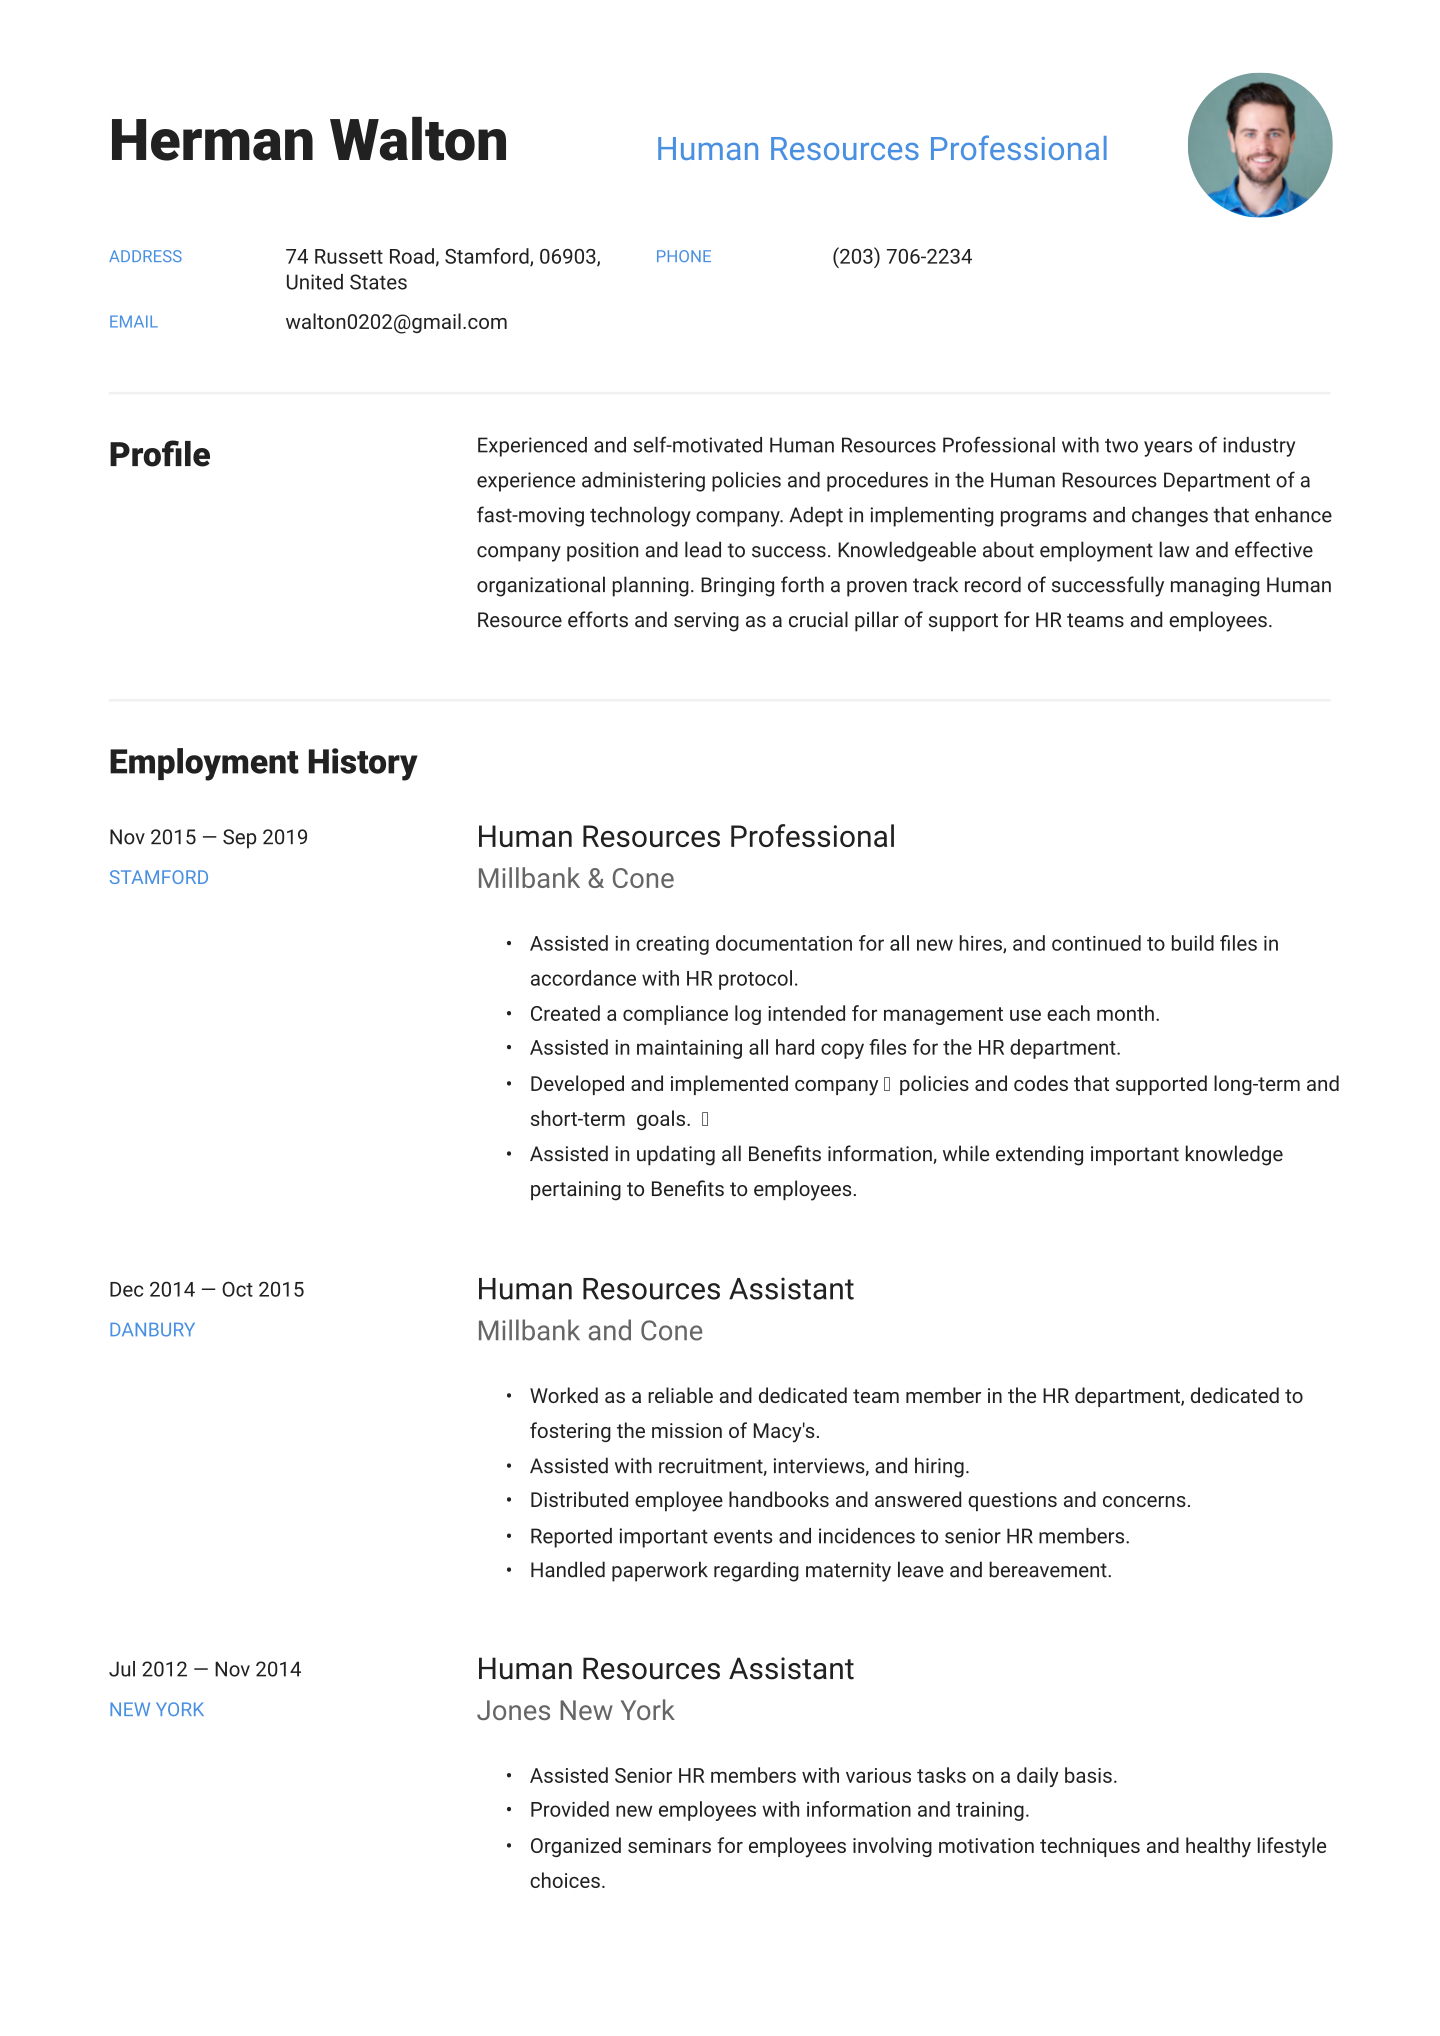 Human Resources Resume Examples Writing Tips 2020 Free inside dimensions 1440 X 2036